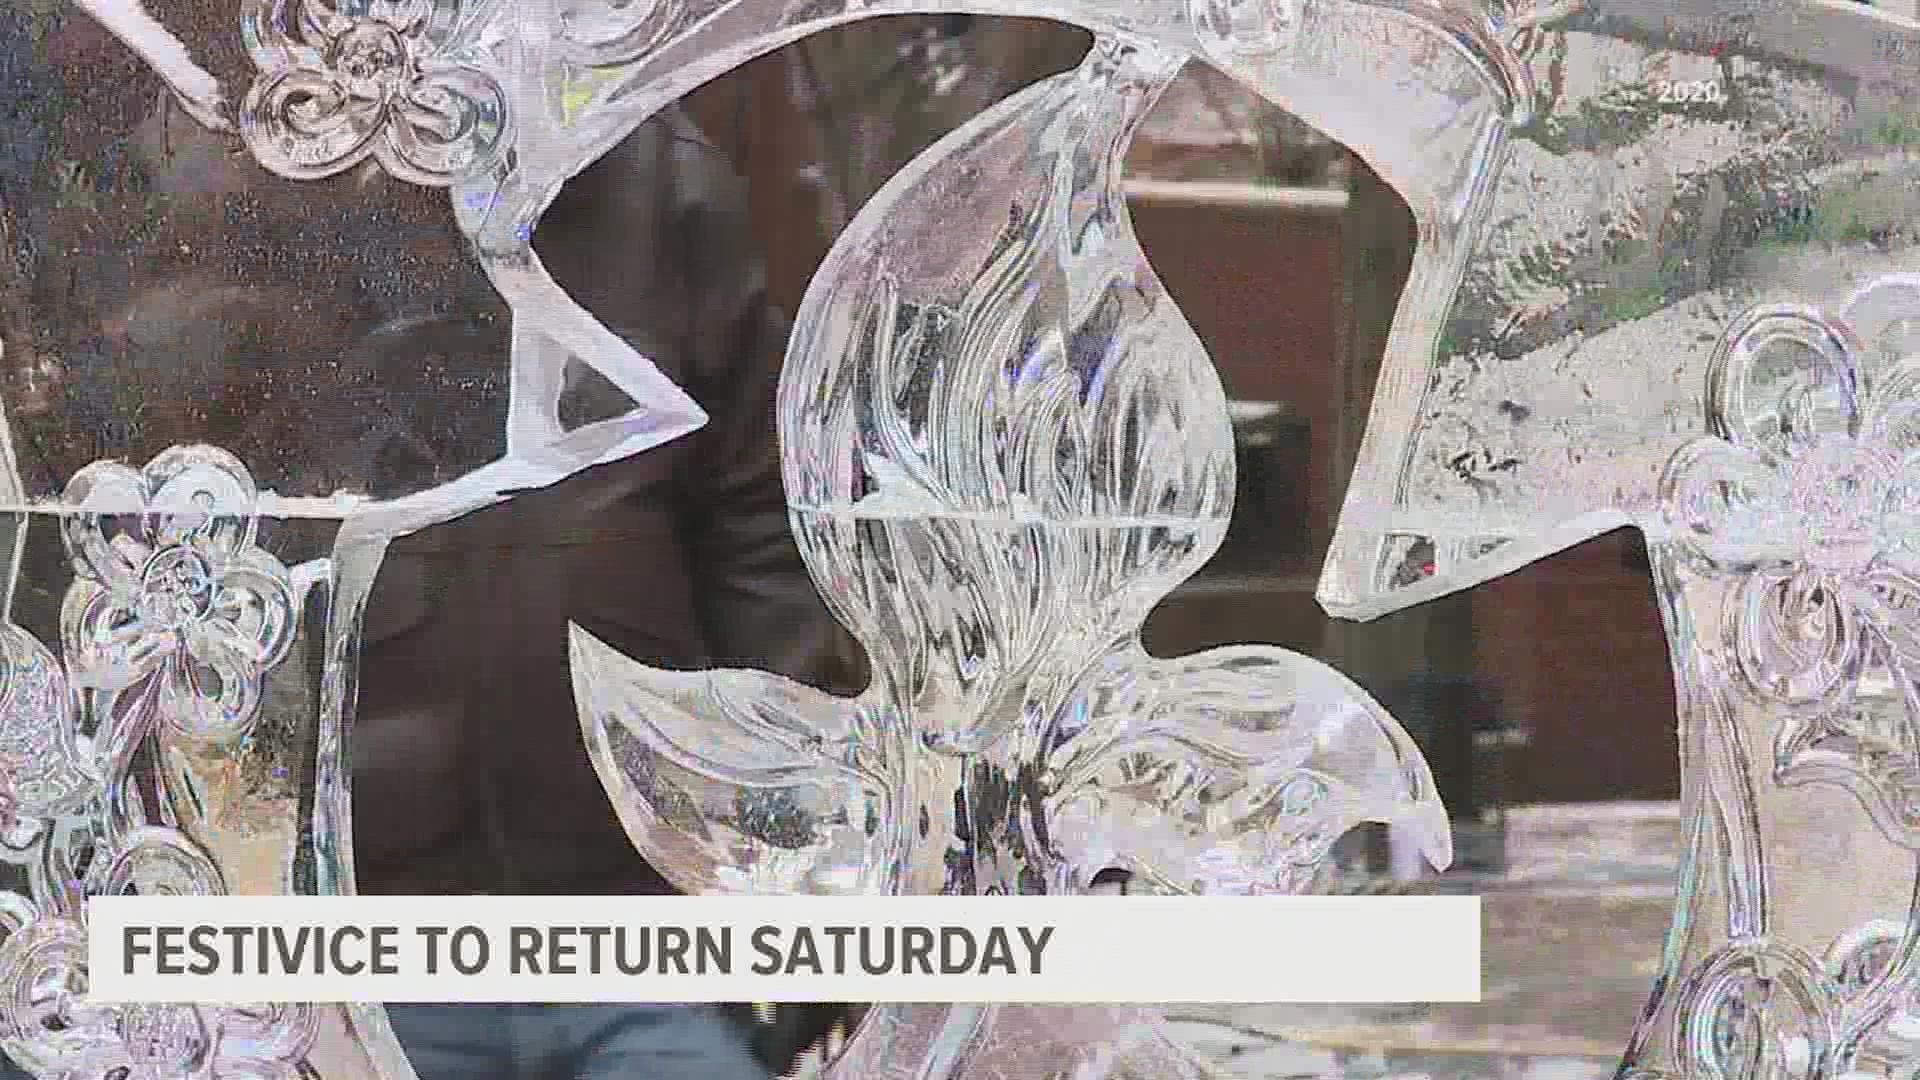 The eighth debut of York's ice event will return Jan. 15 with 40 ice sculptures staged across the city and county of York.